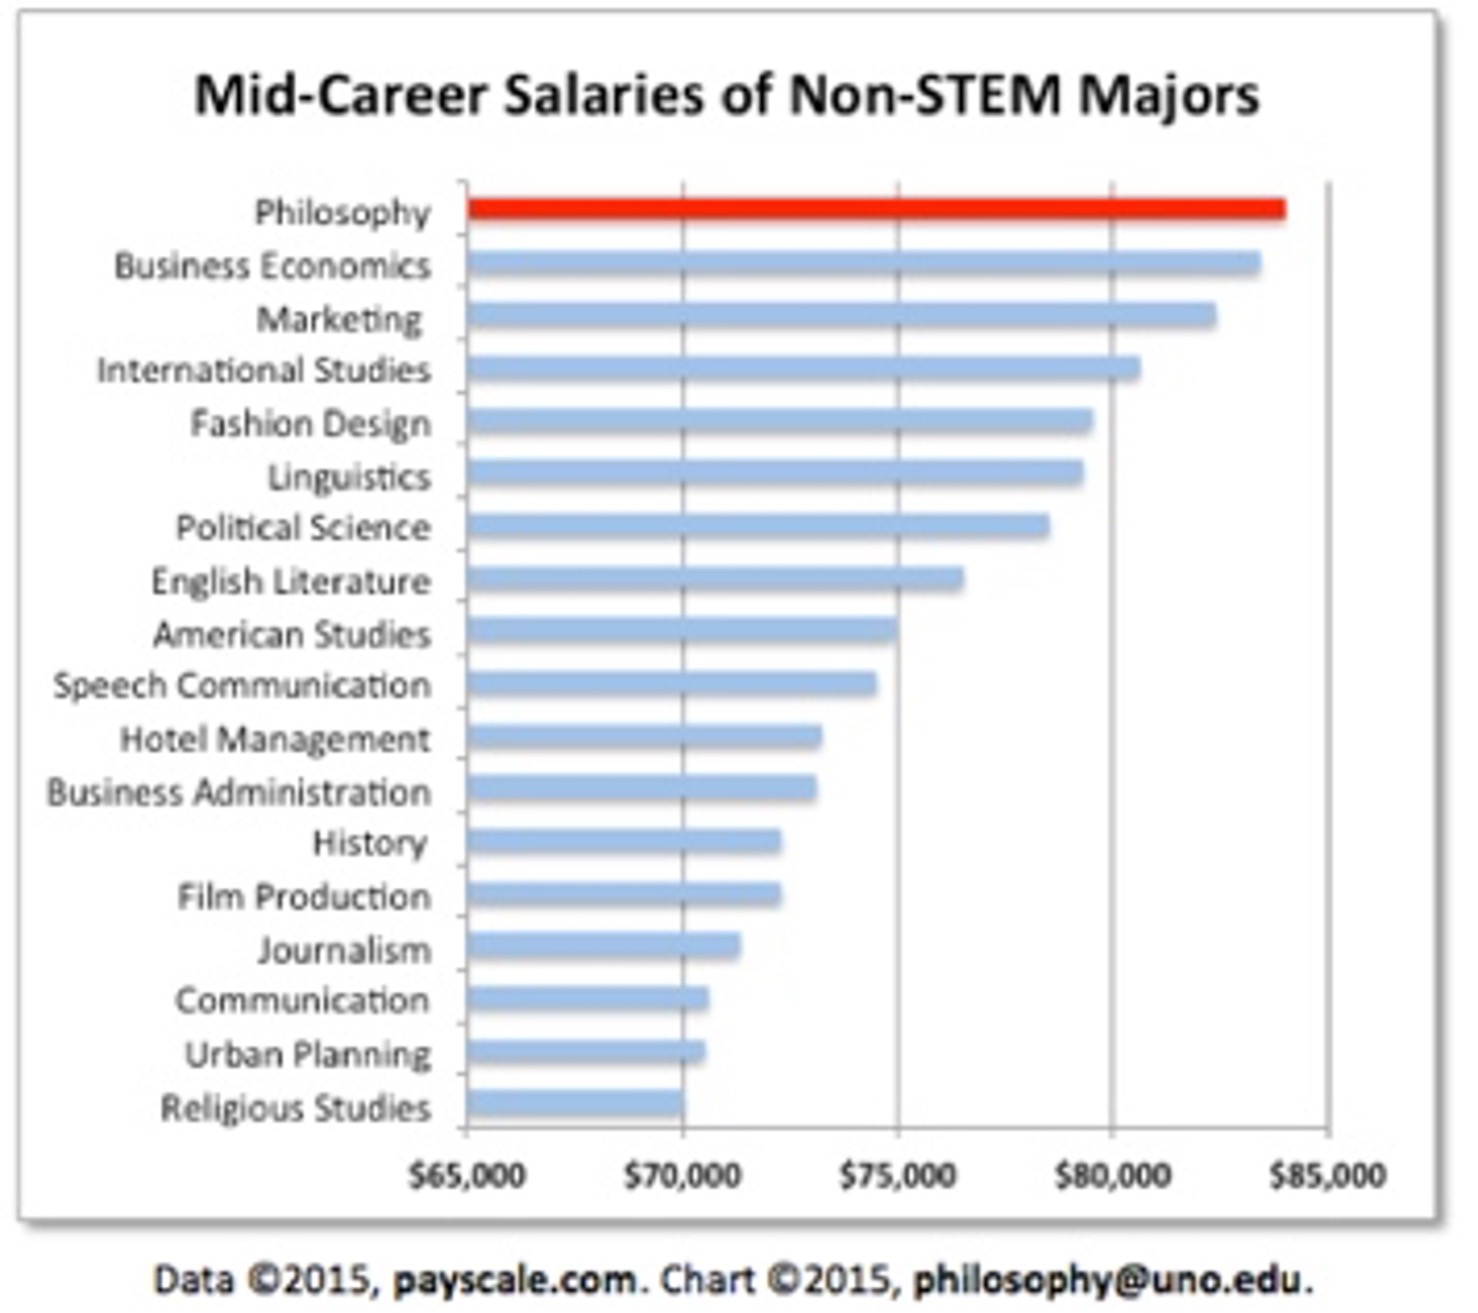 Graph of mid career salaries of non stem majors showing philosophy as the best